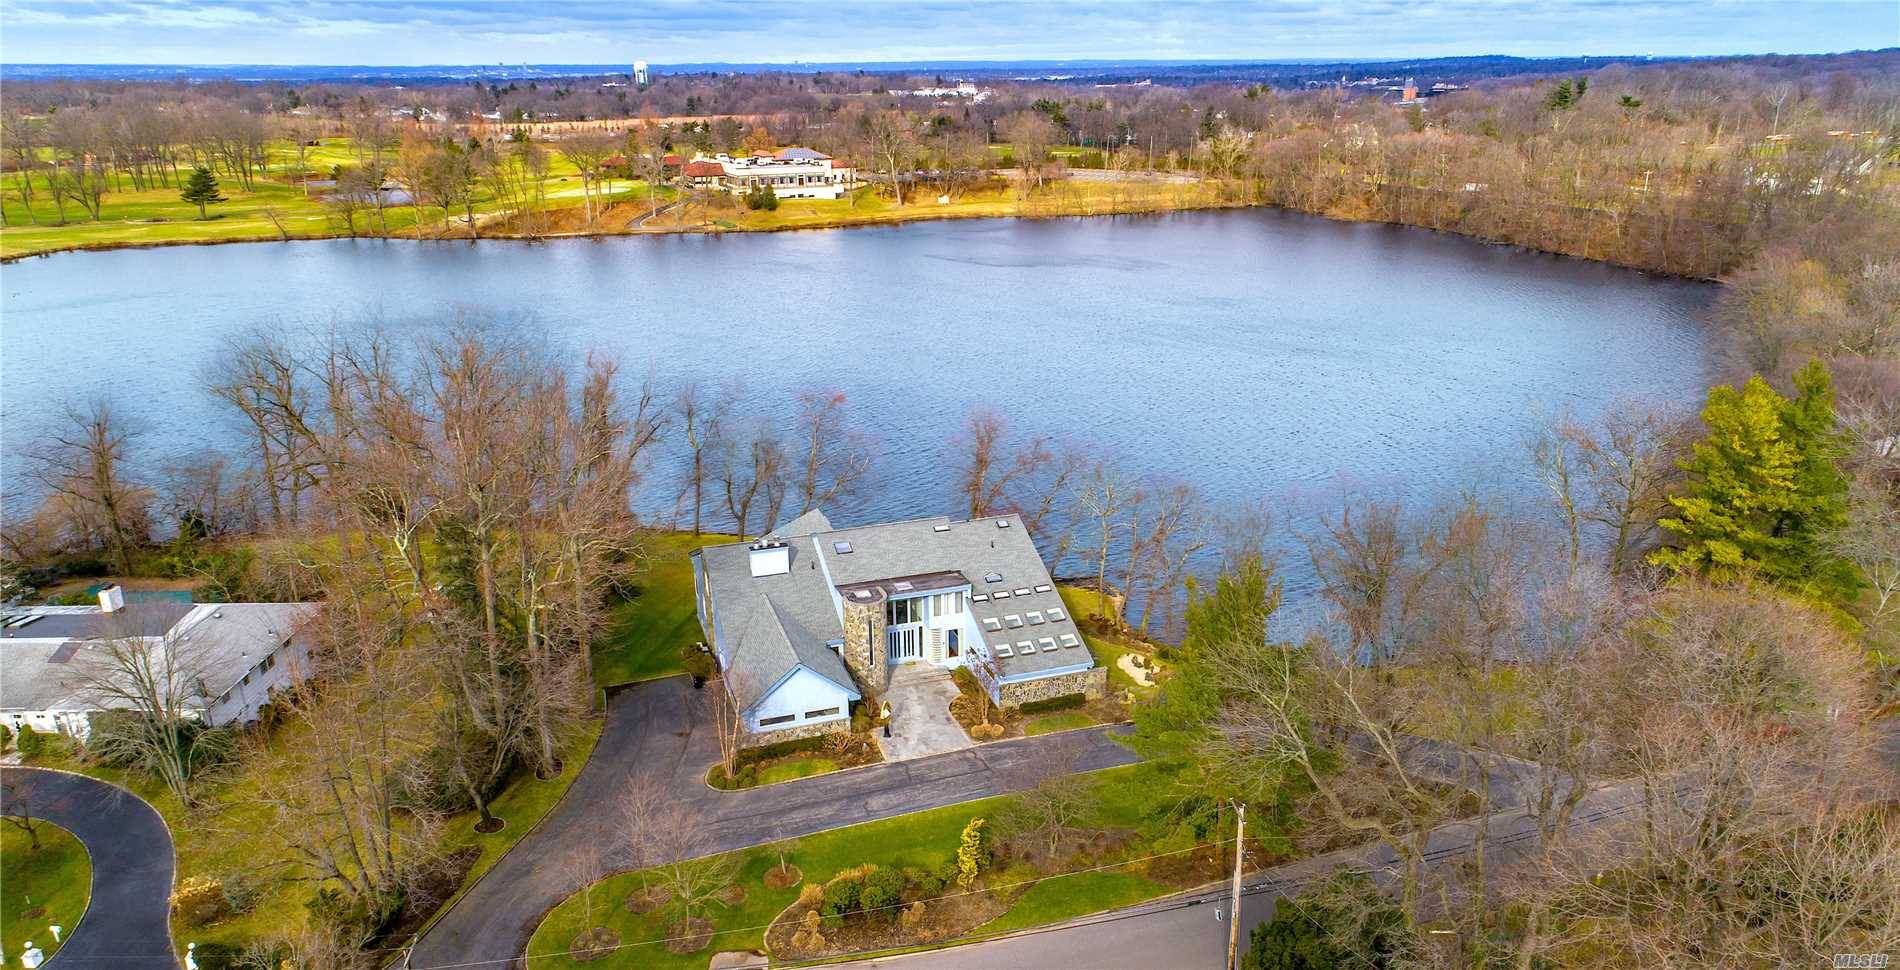 Stunning 7, 500 Sq Ft Contemporary Lakefront Home Situated On Approximately 1 Acre Of Park Like Property On The Only Waterfront Street In Lake Success.